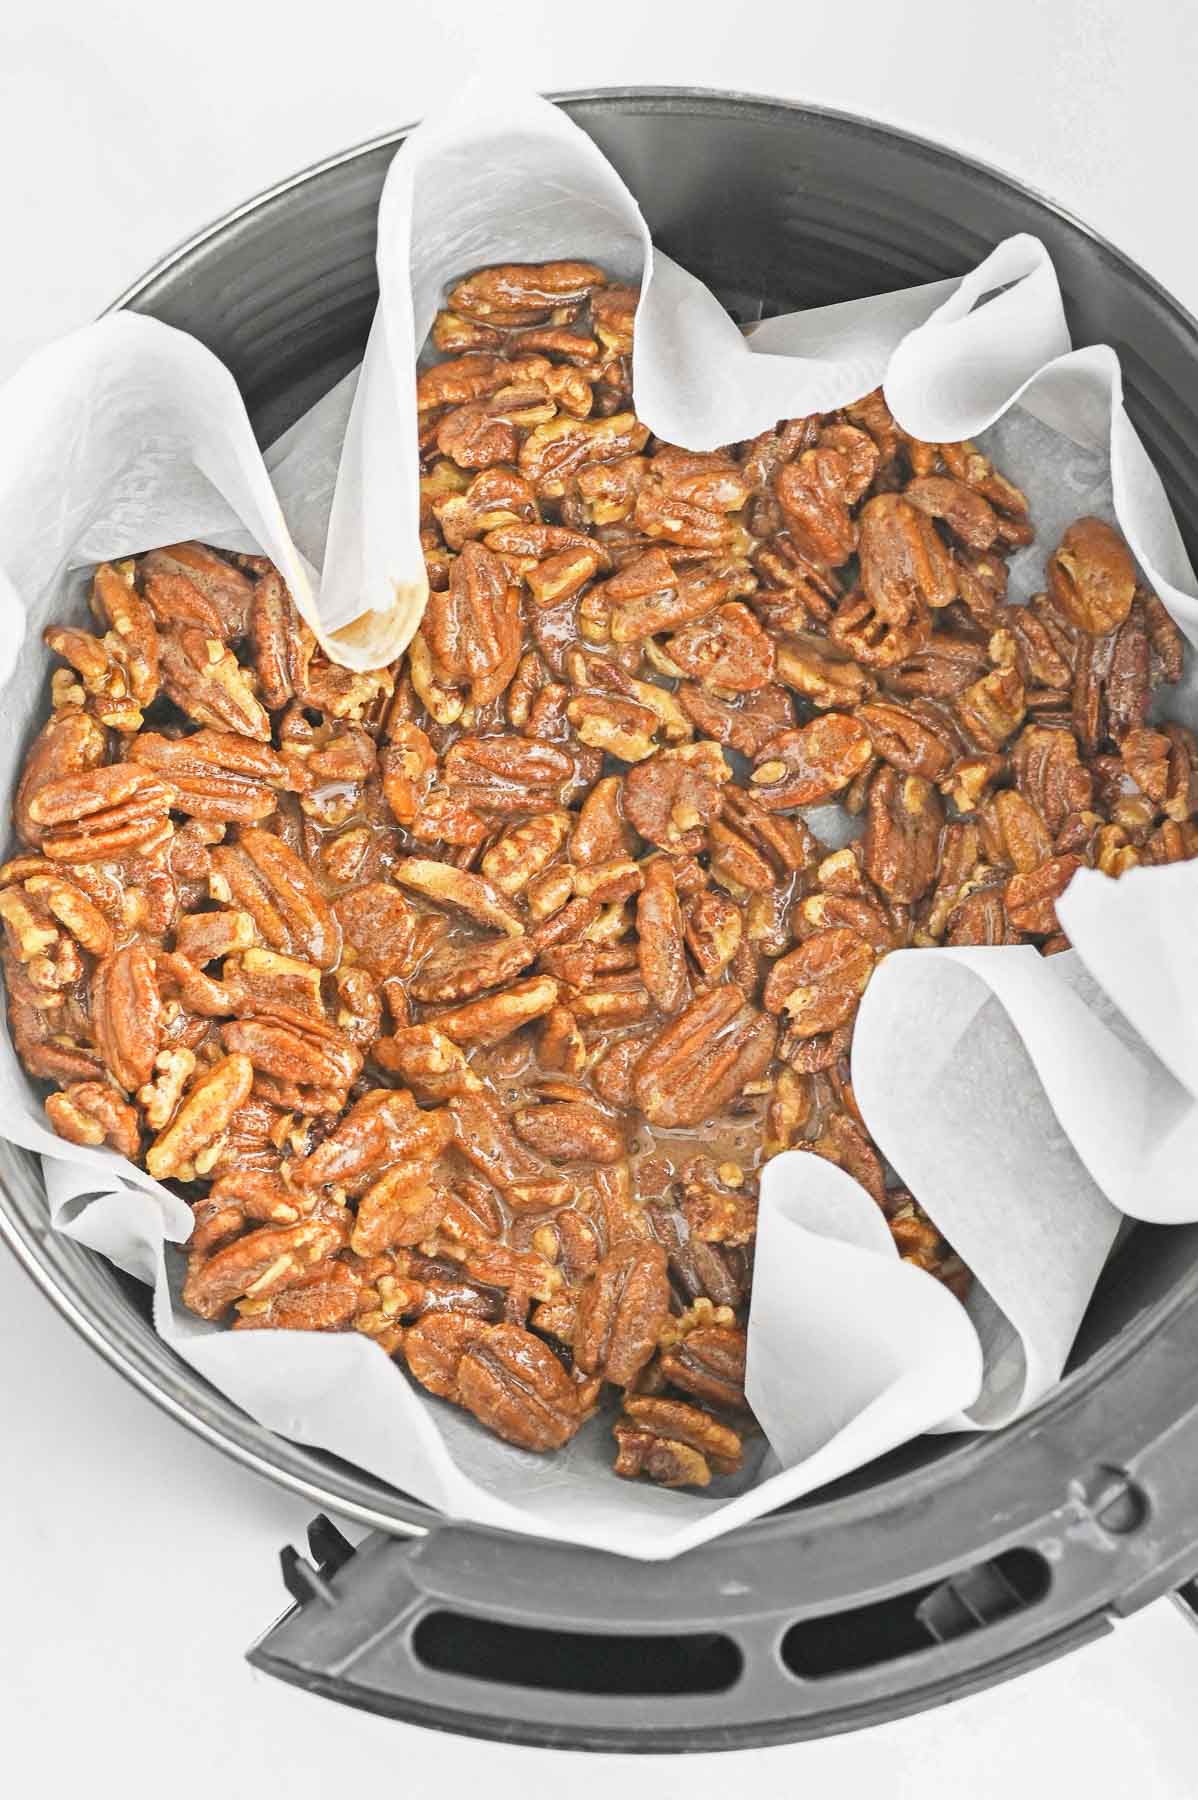 Pecans in an air fryer on a sheet of parchment paper.